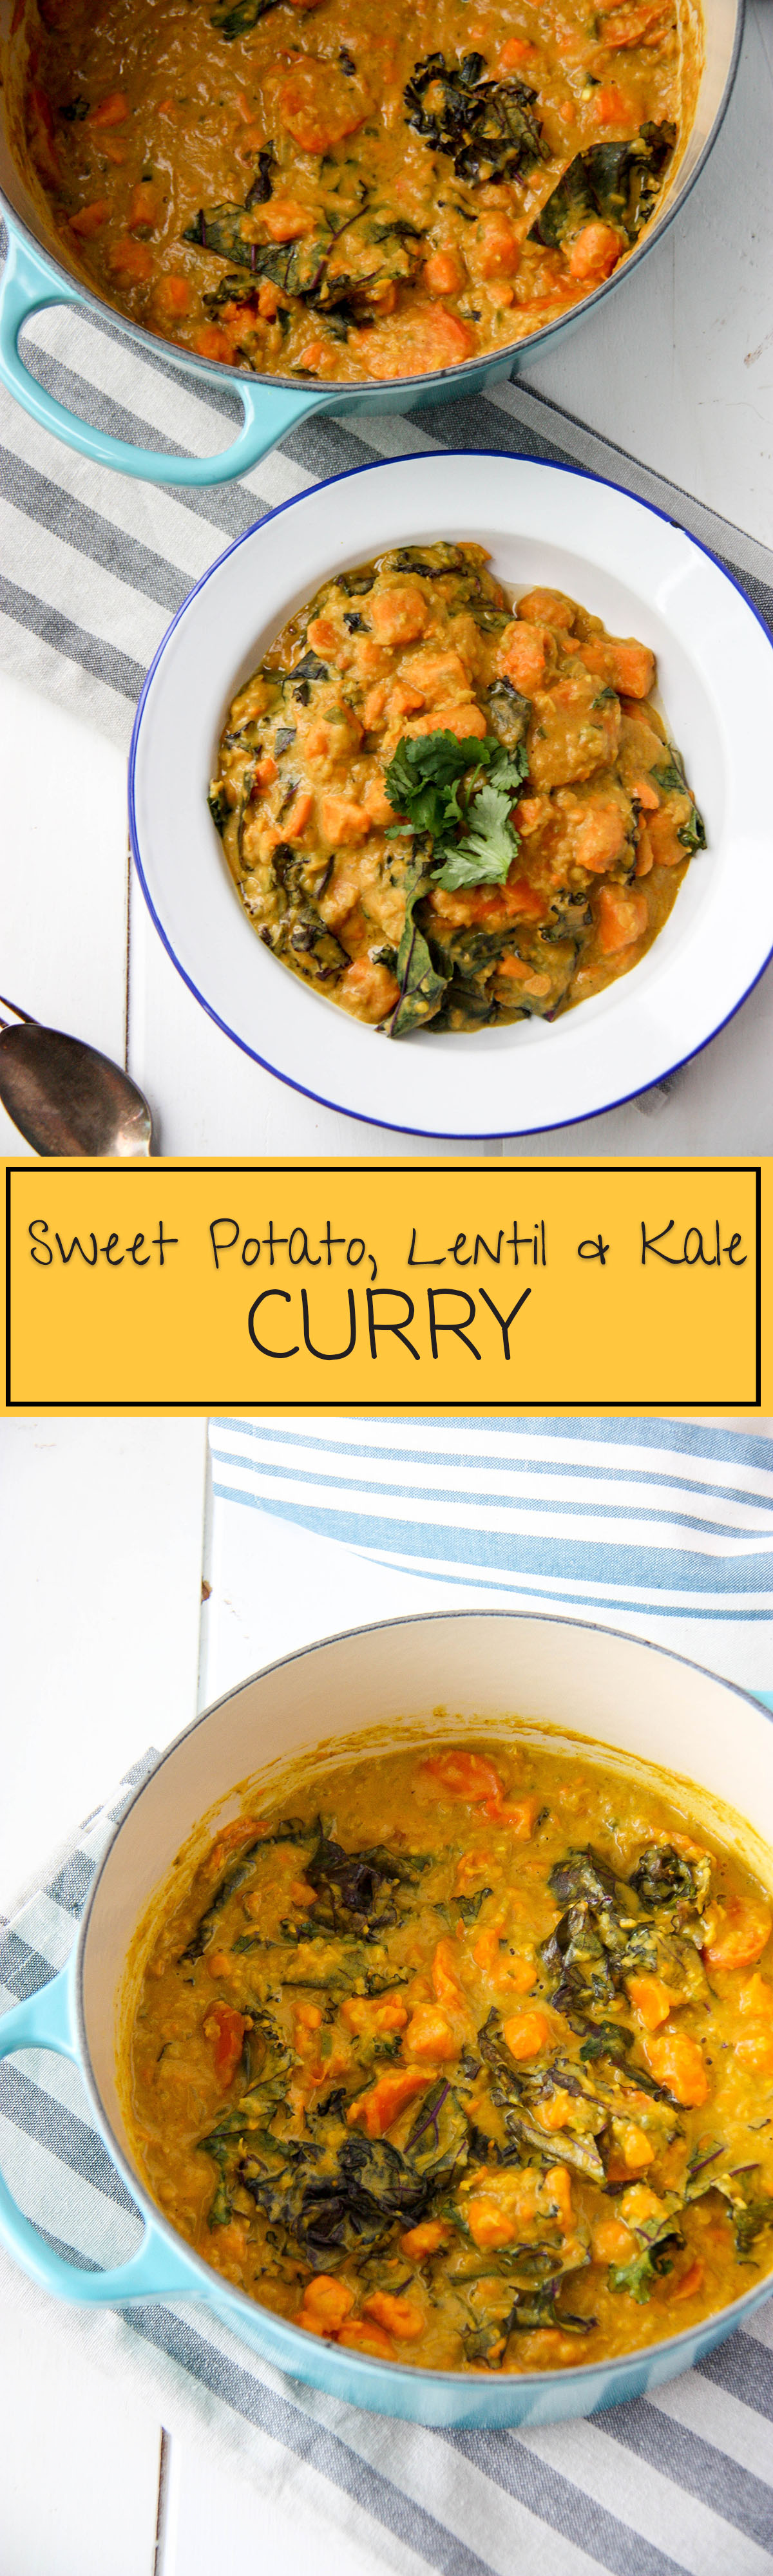 Sweet Potato, Lentil & Kale Curry - perfect vegetarian weeknight meal, healthy www.thehomecookskitchen.com